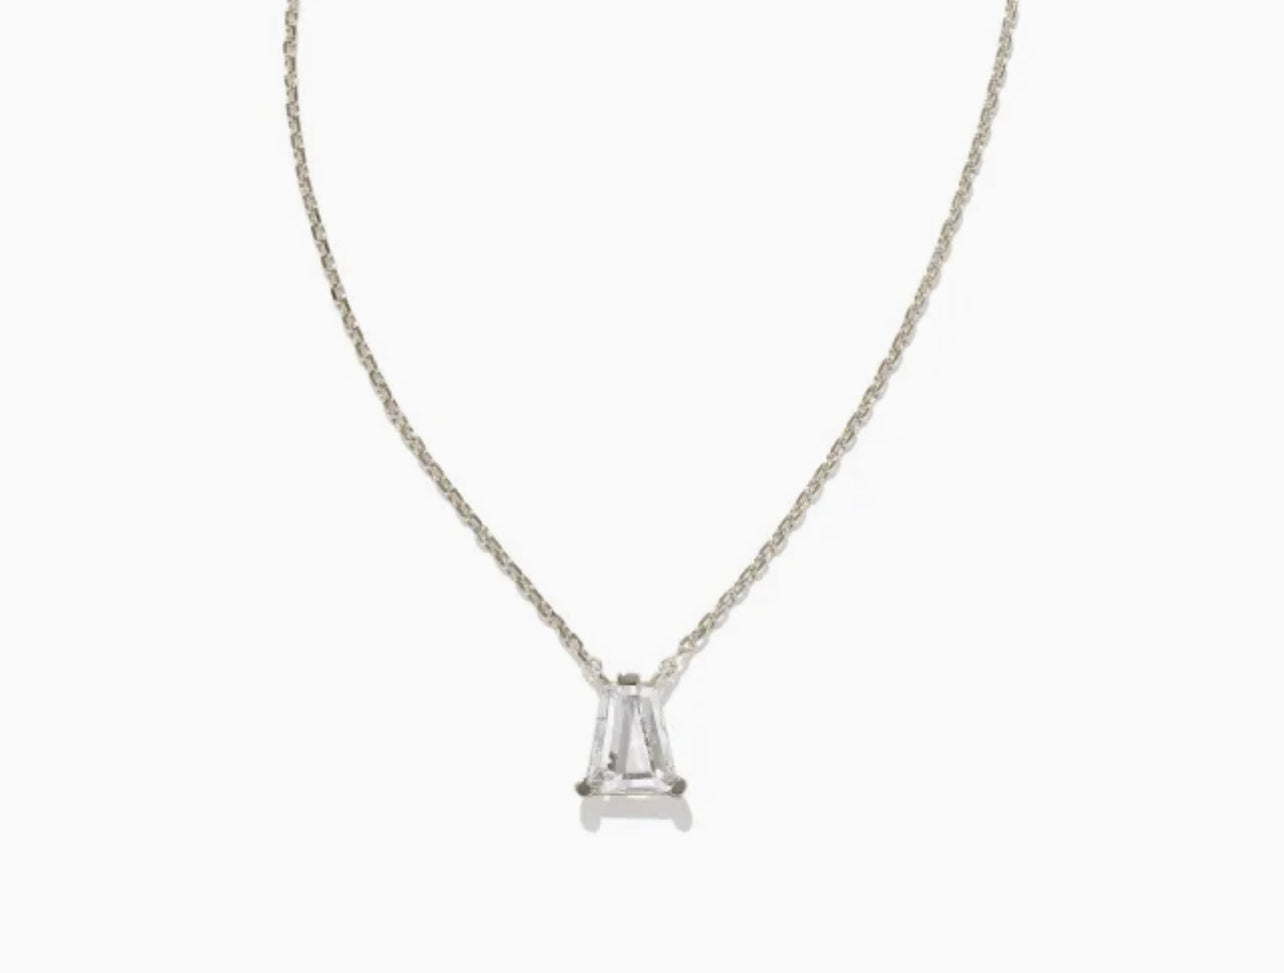 Kendra Scott-Blair Silver Pendant Necklace in White Crystal 9608802870